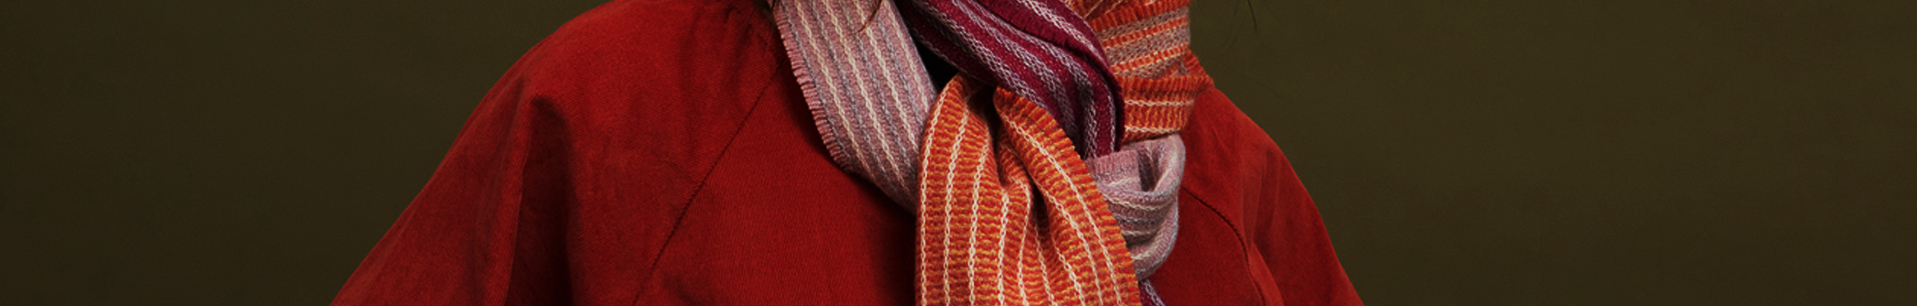 Wallace Sewell Scarves